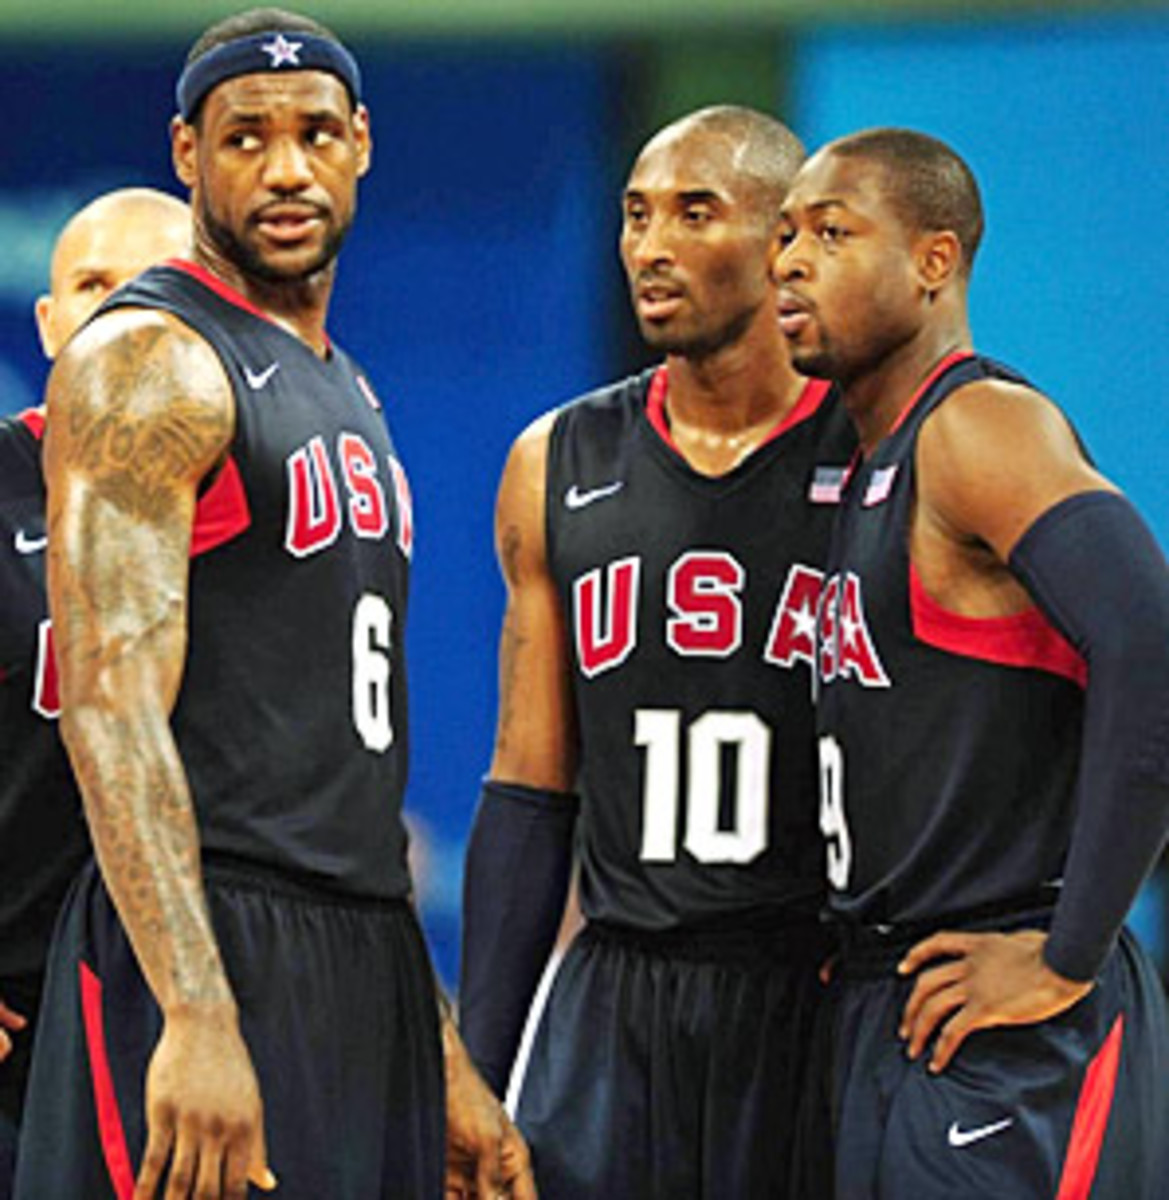 Redeem team would beat the Dream Team - Sports Illustrated